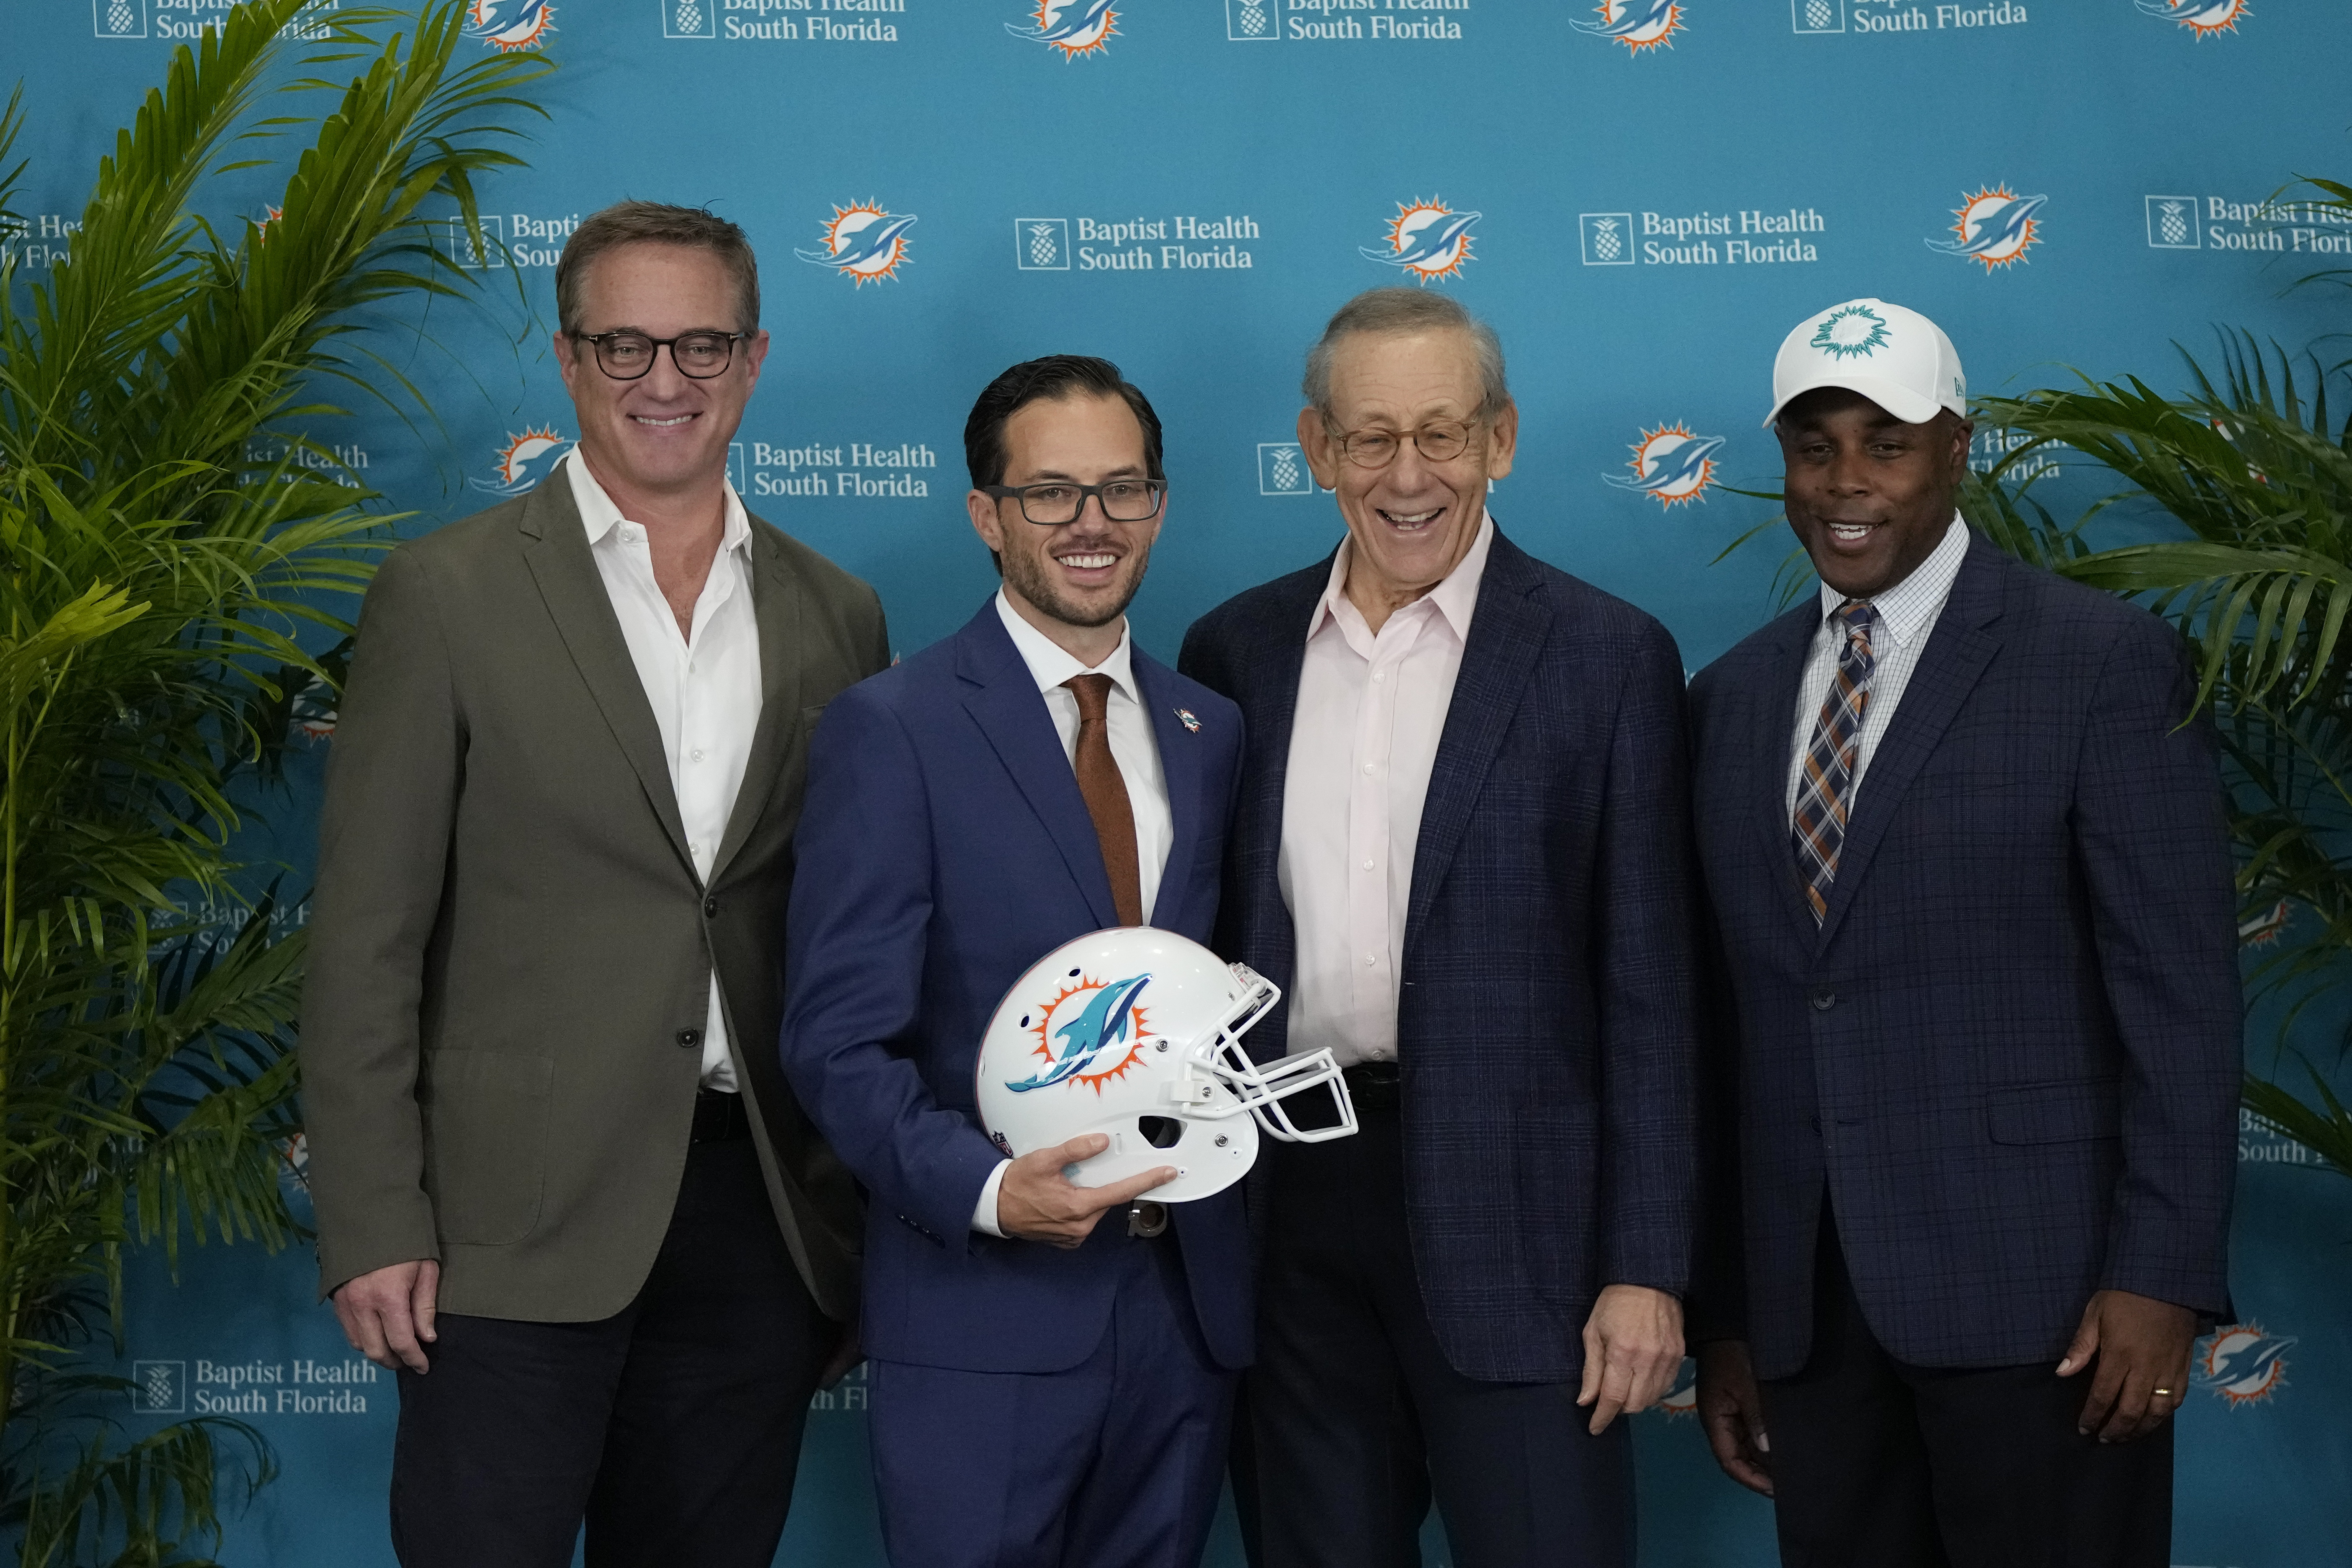 Miami Dolphins stripped of draft picks for 'unprecedented